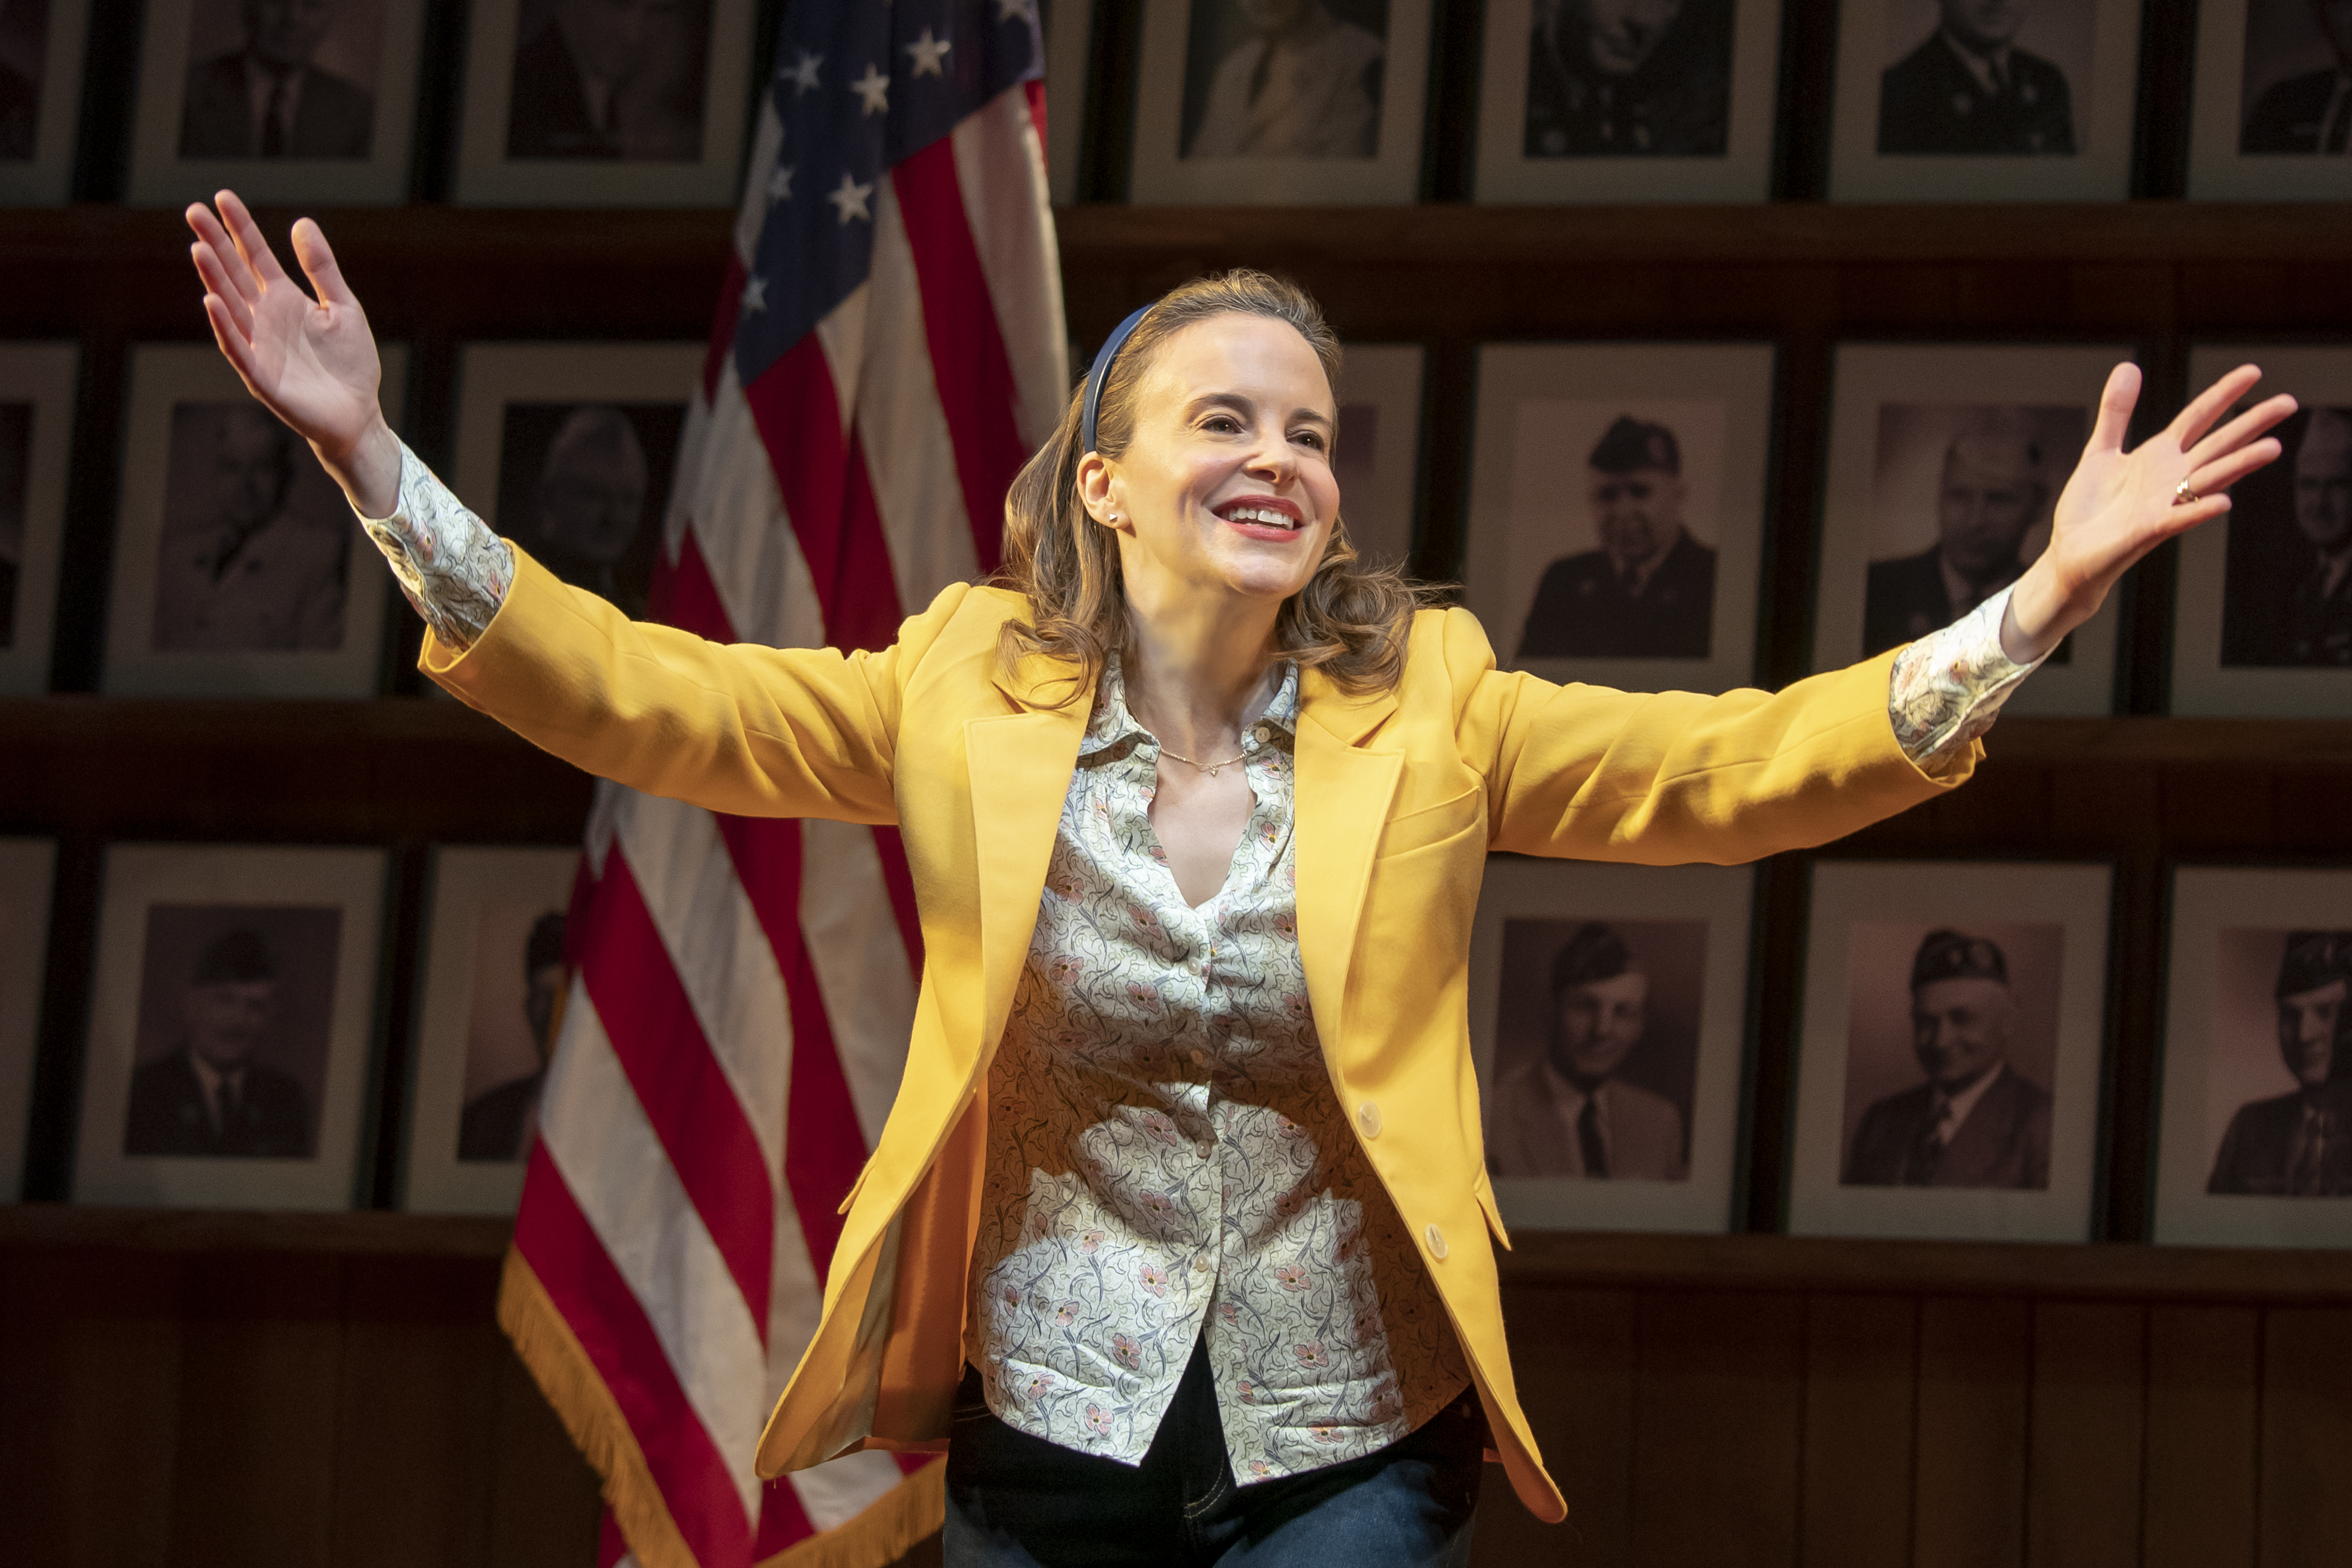 Maria Dizzia stars in the national touring production of “What the Constitution Means to Me.”